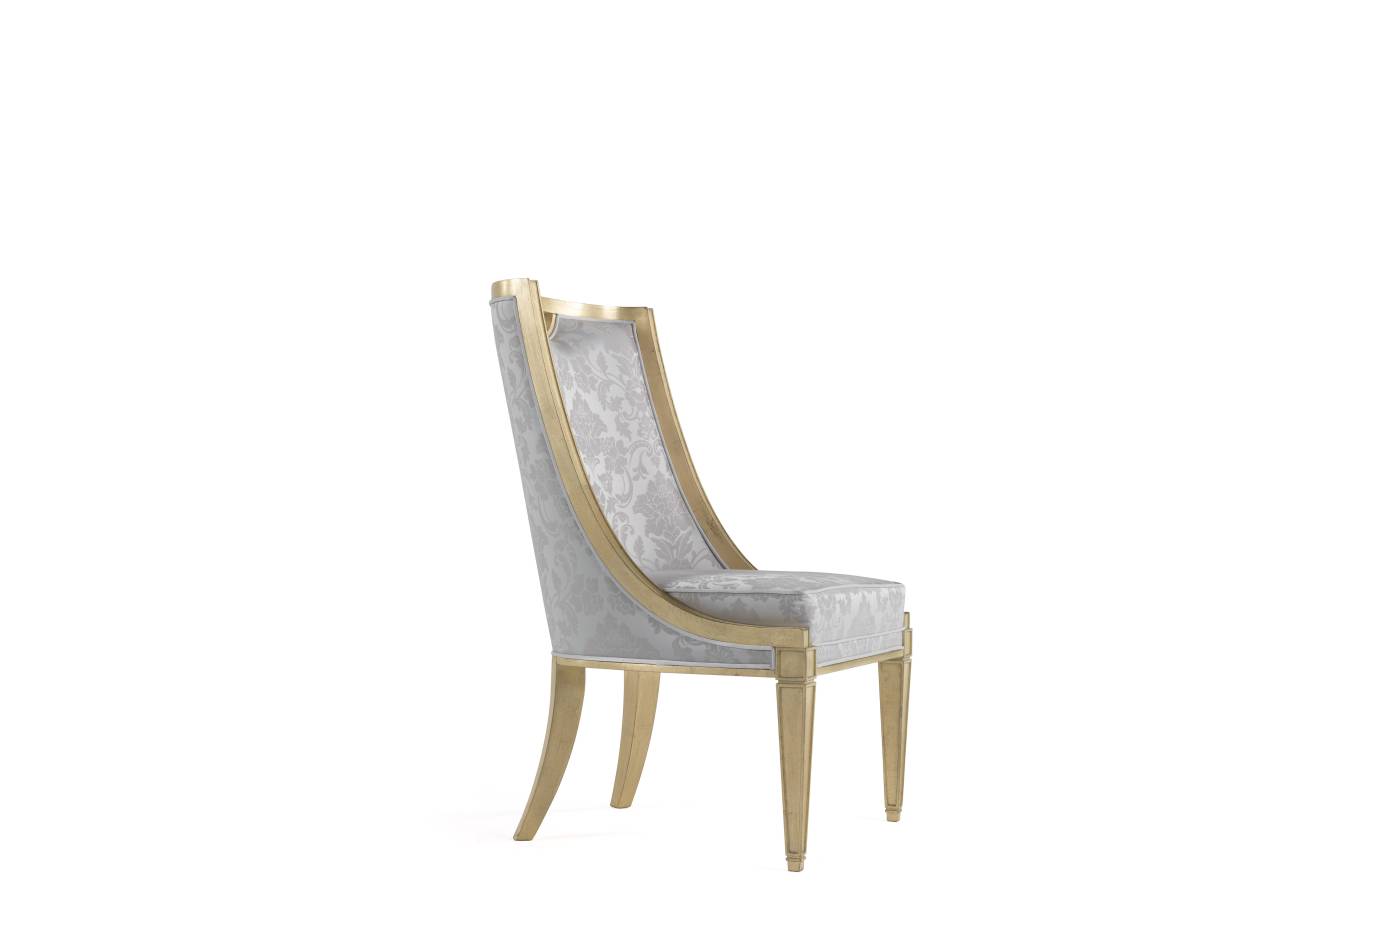 FRAGONARD chair - Bespoke projects with luxury Made in Italy classic furniture